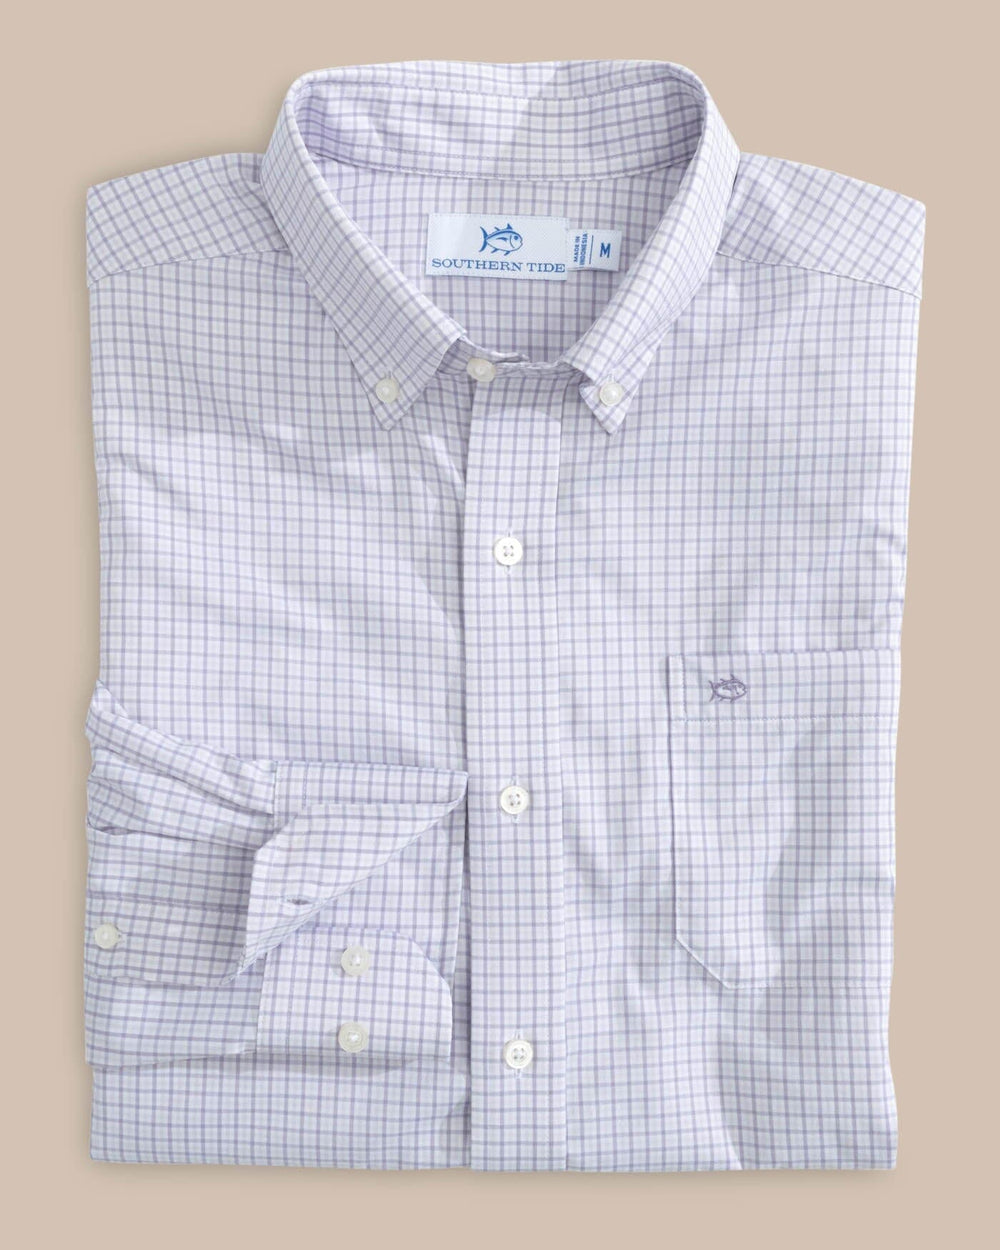 The front view of the Southern Tide brrr Intercoastal McBee Check Long Sleeve Sportshirt by Southern Tide - Wisteria Purple